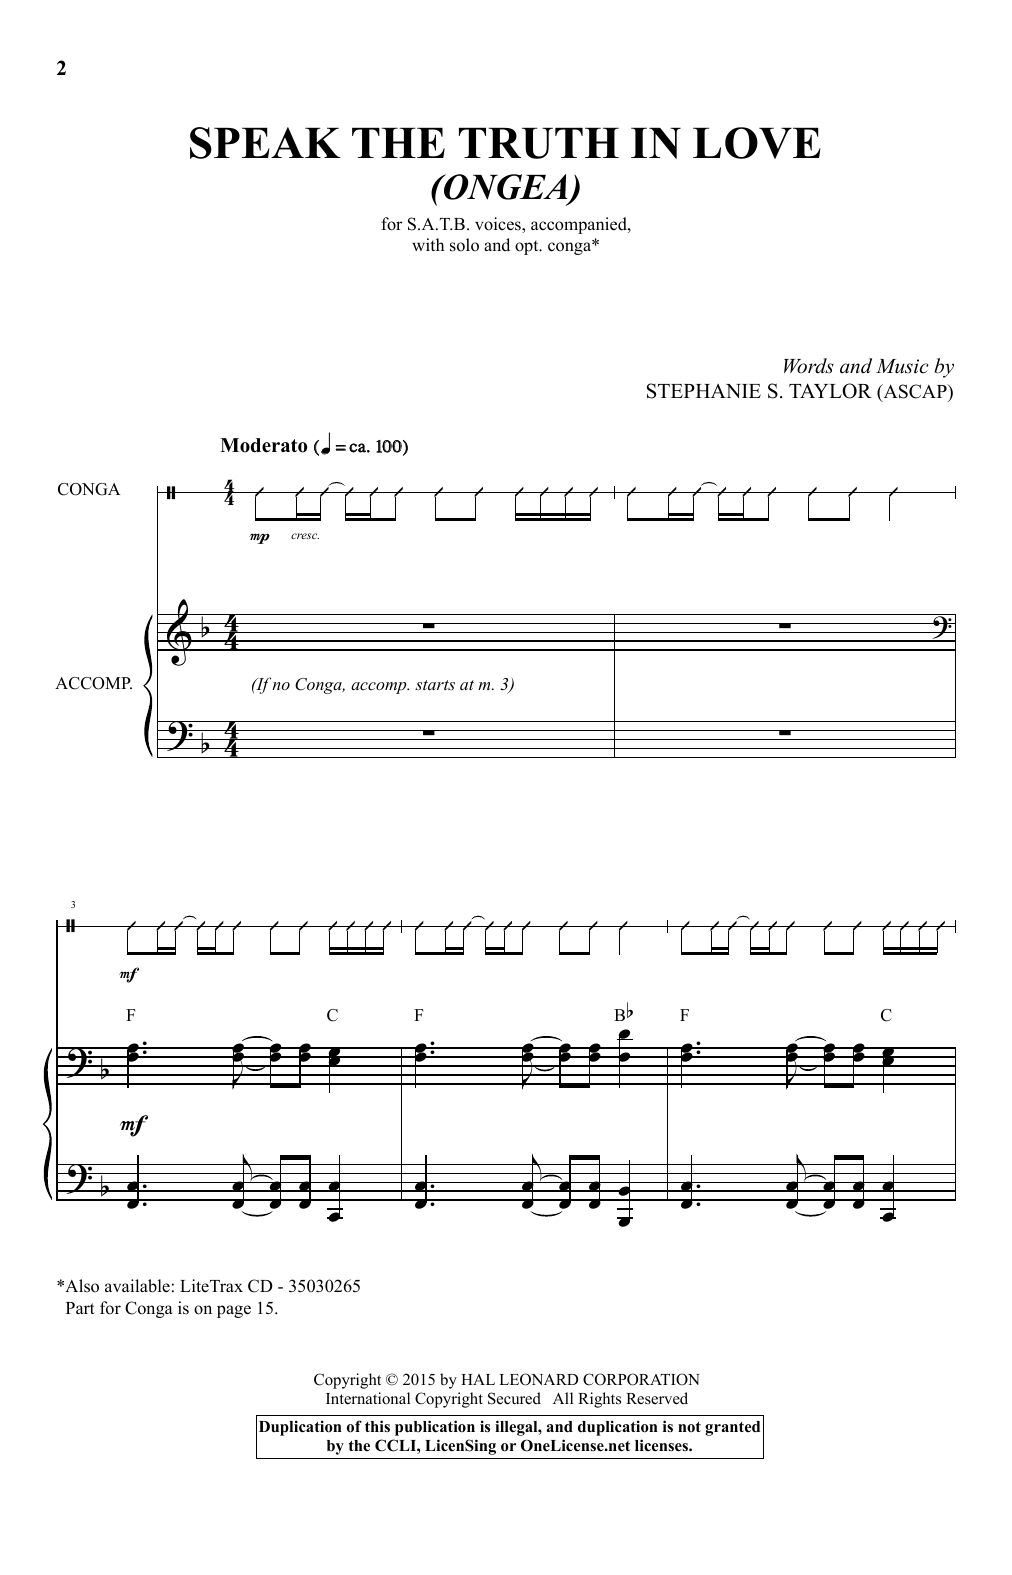 Download Stephanie S. Taylor Speak The Truth In Love (Ongea) Sheet Music